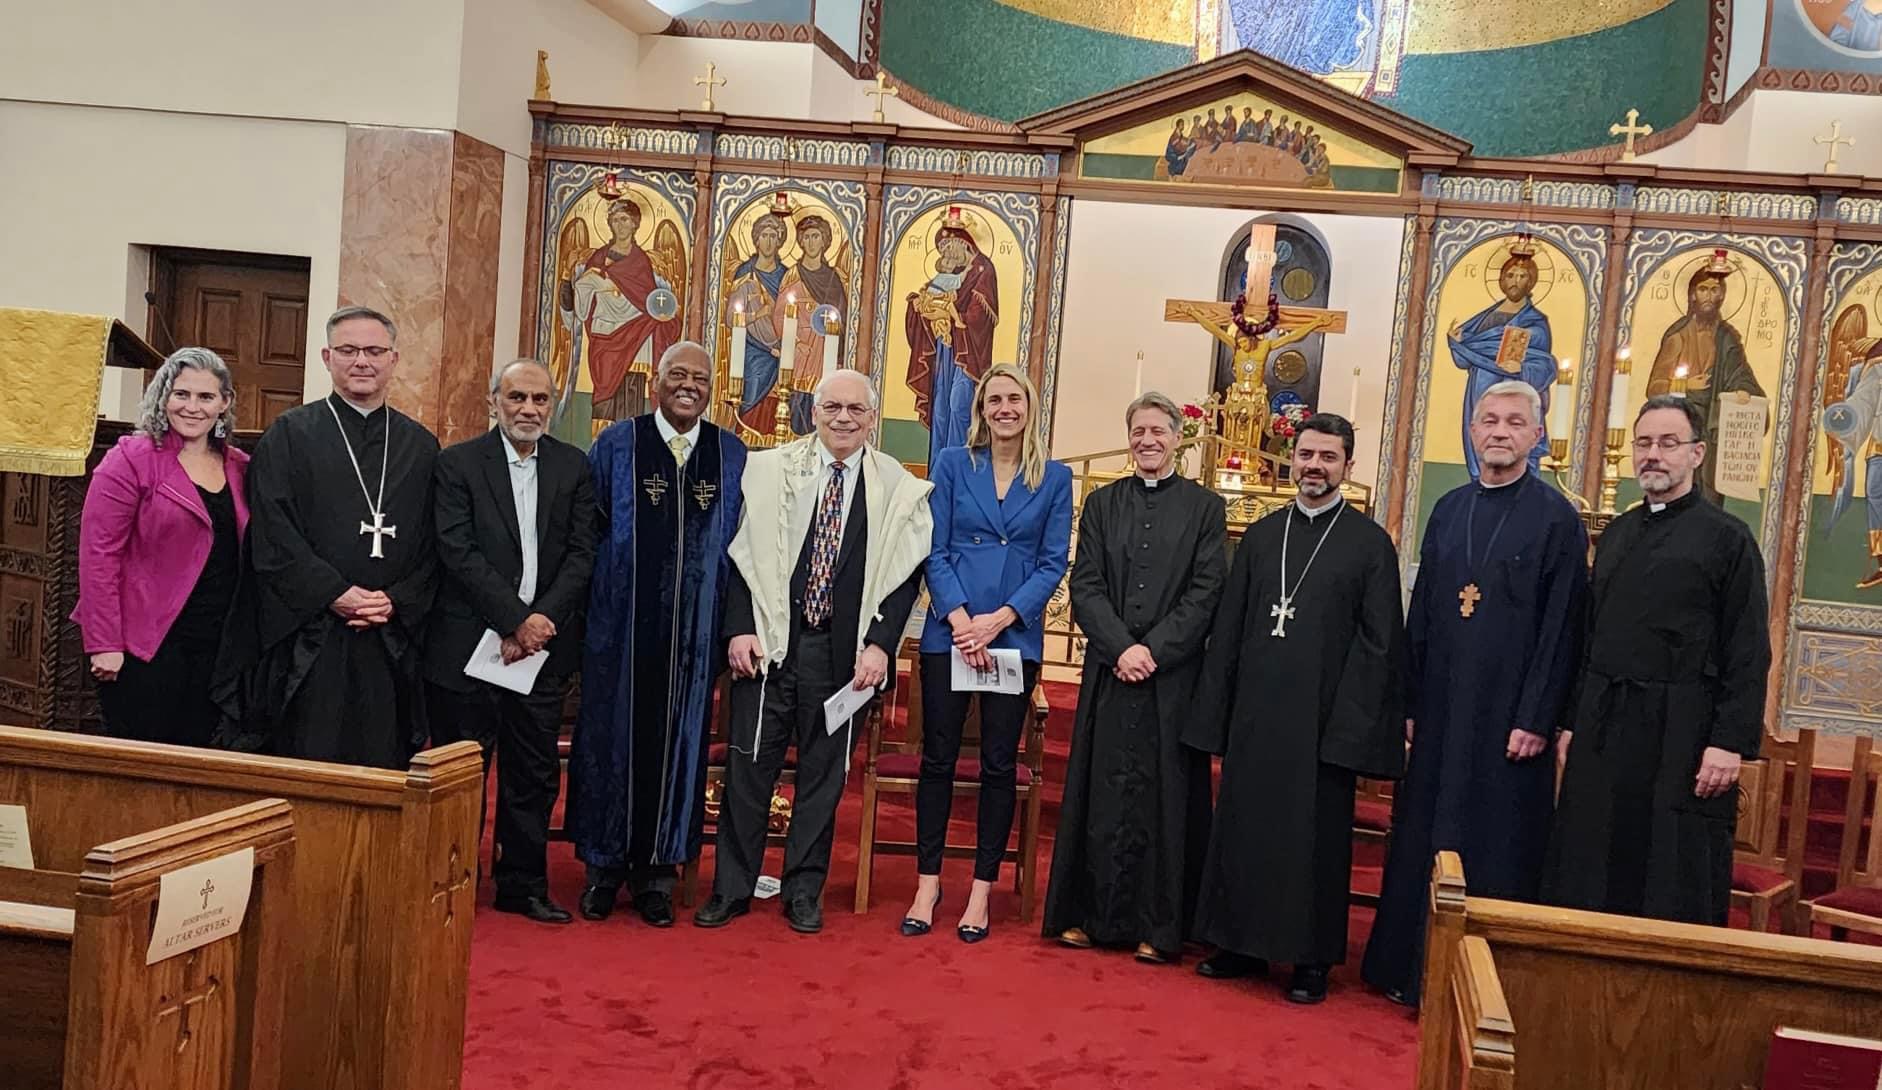 Mayor Simmons stands with members of the interfaith council